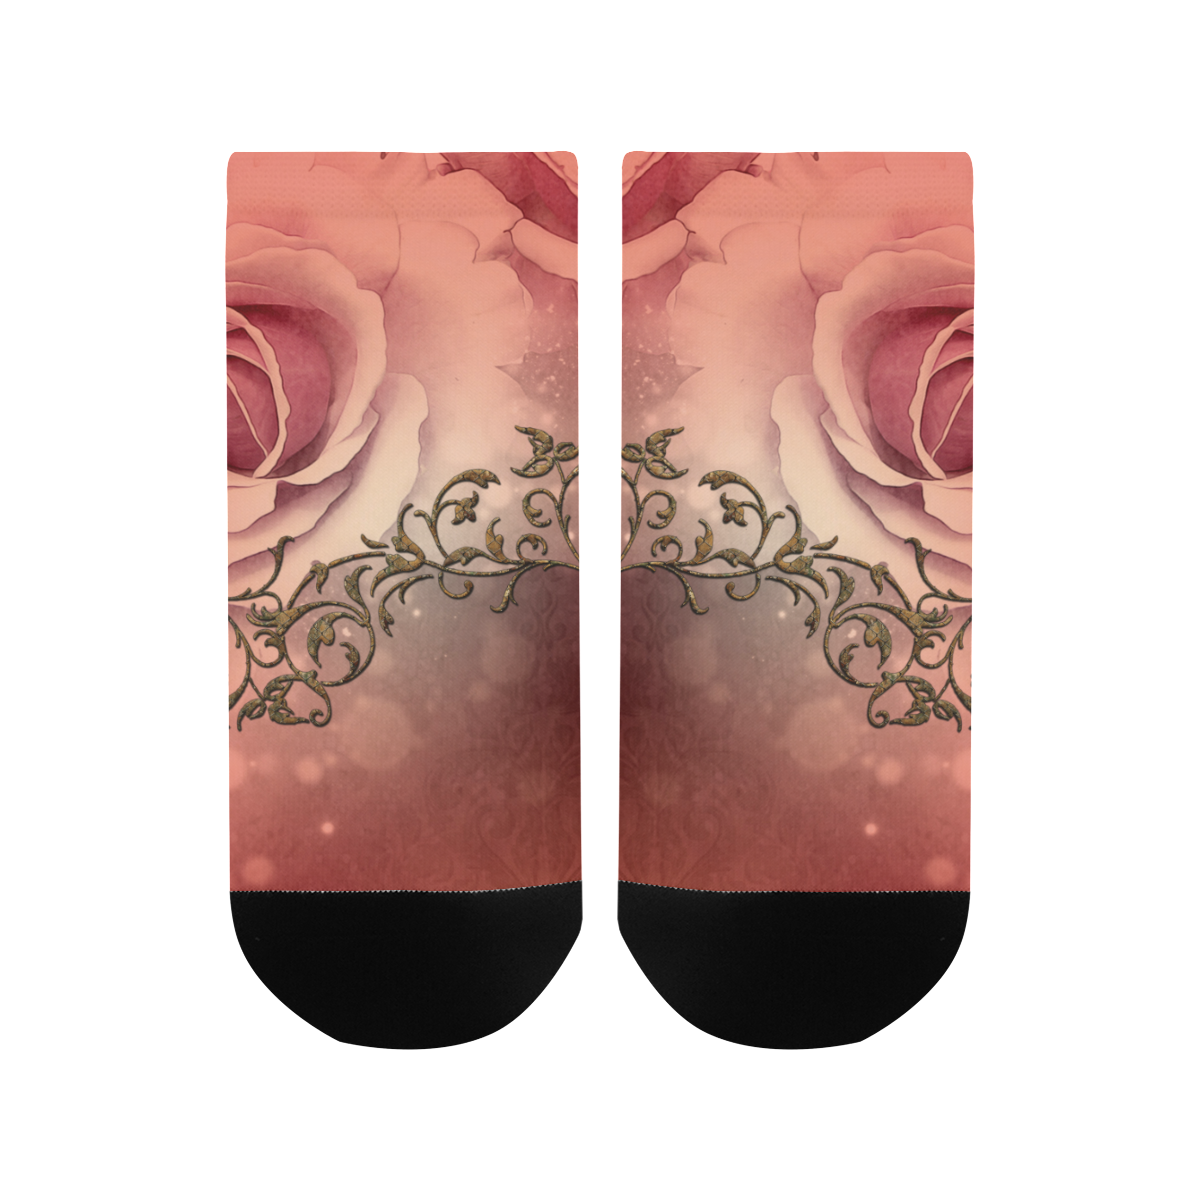 Wonderful roses with floral elements Men's Ankle Socks